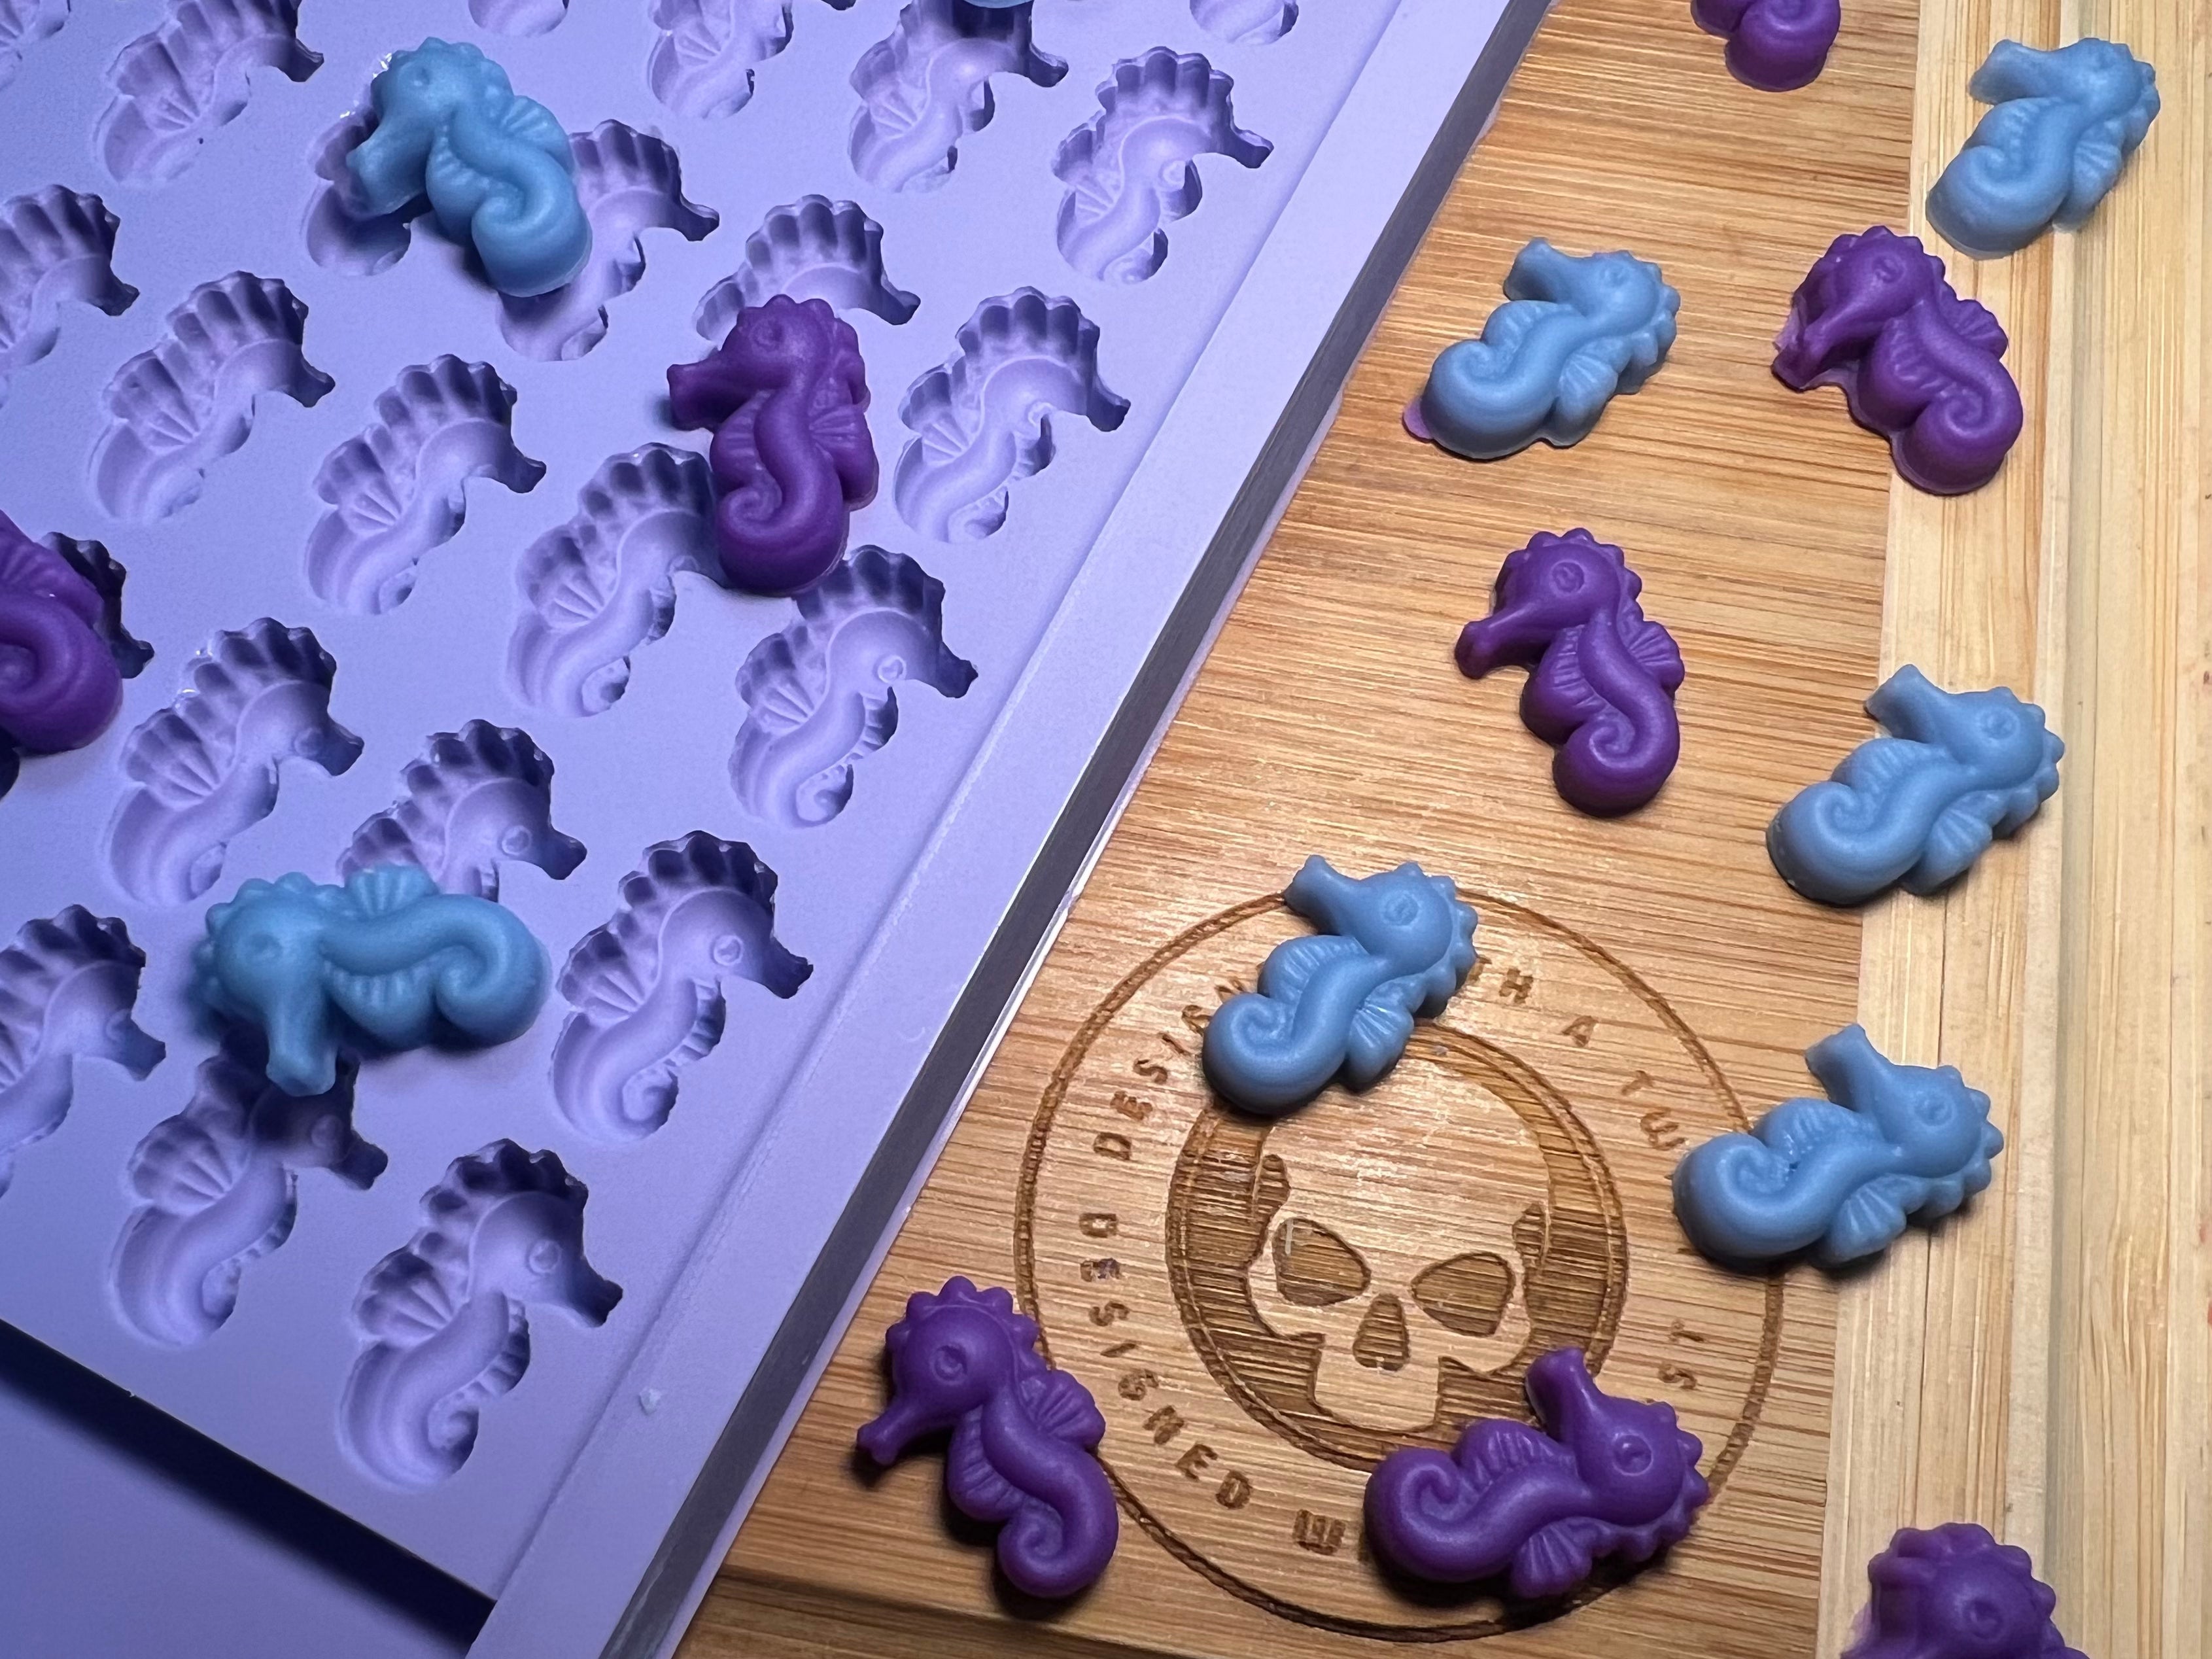 3D Sea Horse Scrape n Scoop Wax Silicone Mold - Designed with a Twist - Top quality silicone molds made in the UK.